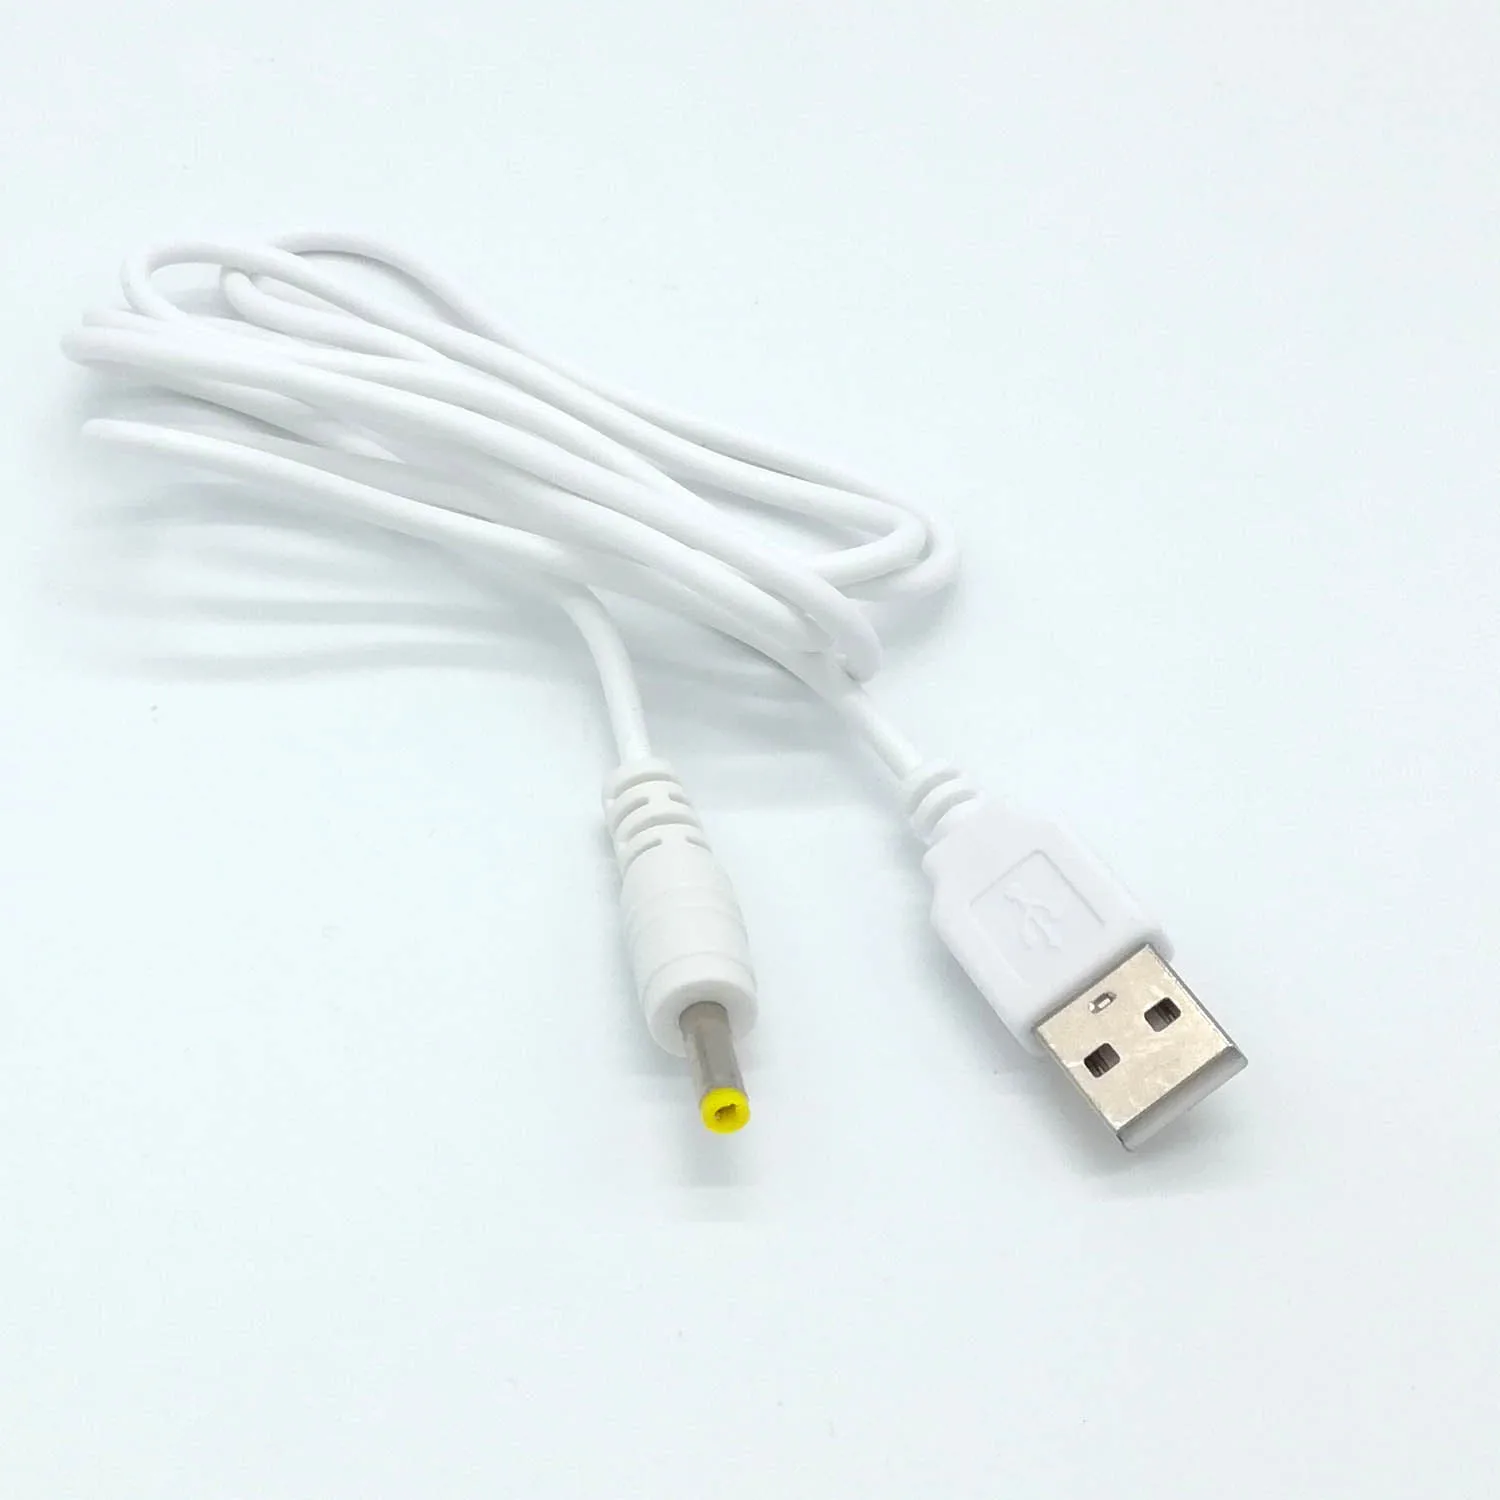 USB To DC 4.0x1.7 mm Power Charging Charger Cable Supply For Sony PSP gm 